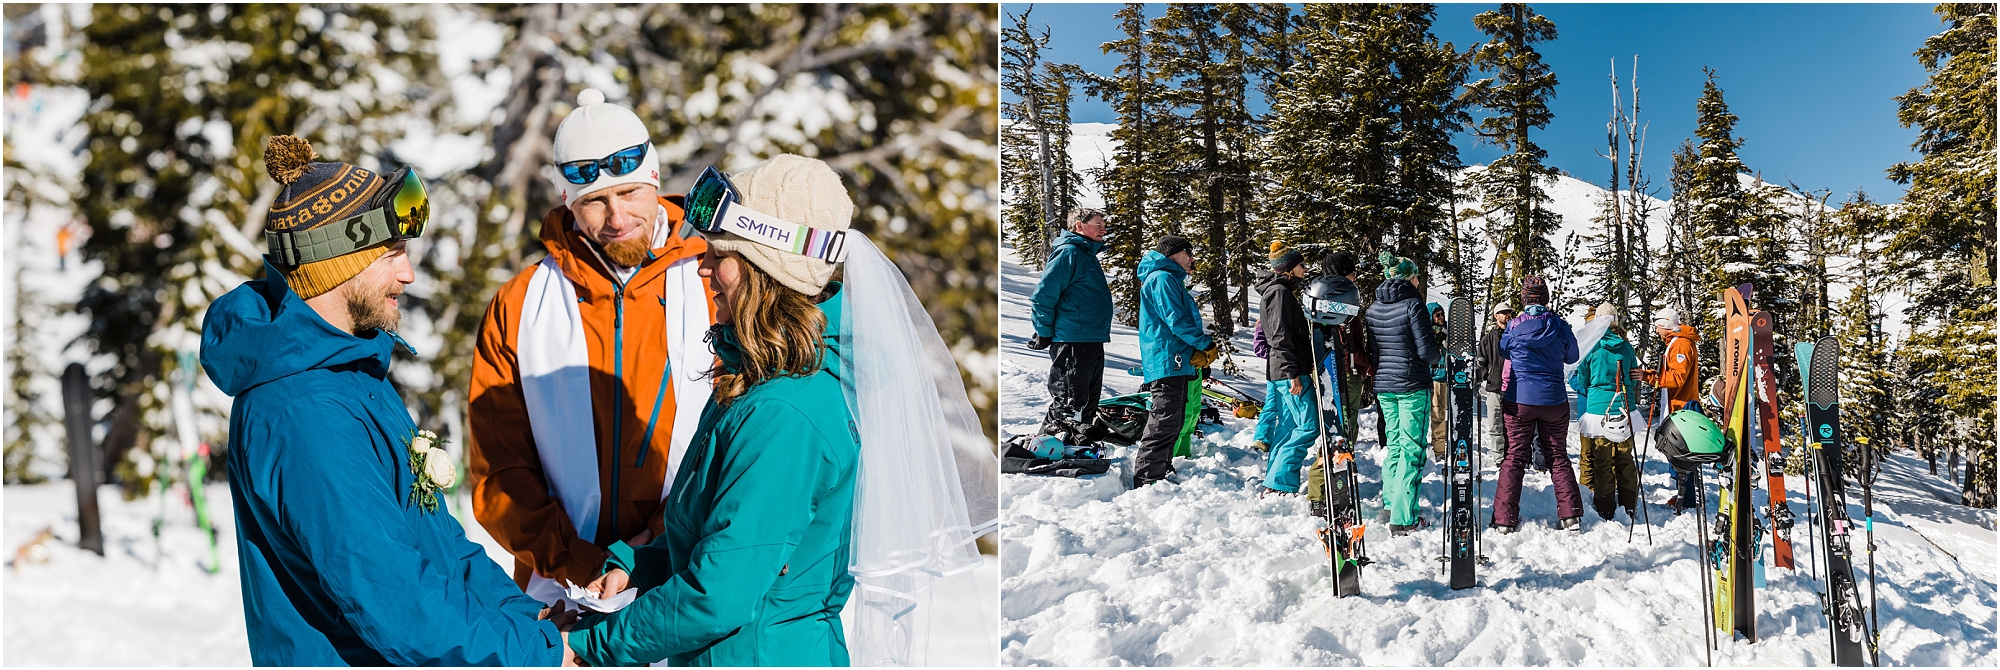 A Mt Bachelor adventure elopement ceremony happens on the slopes of this ski resort right outside of Bend, Oregon. | Erica Swantek Photography